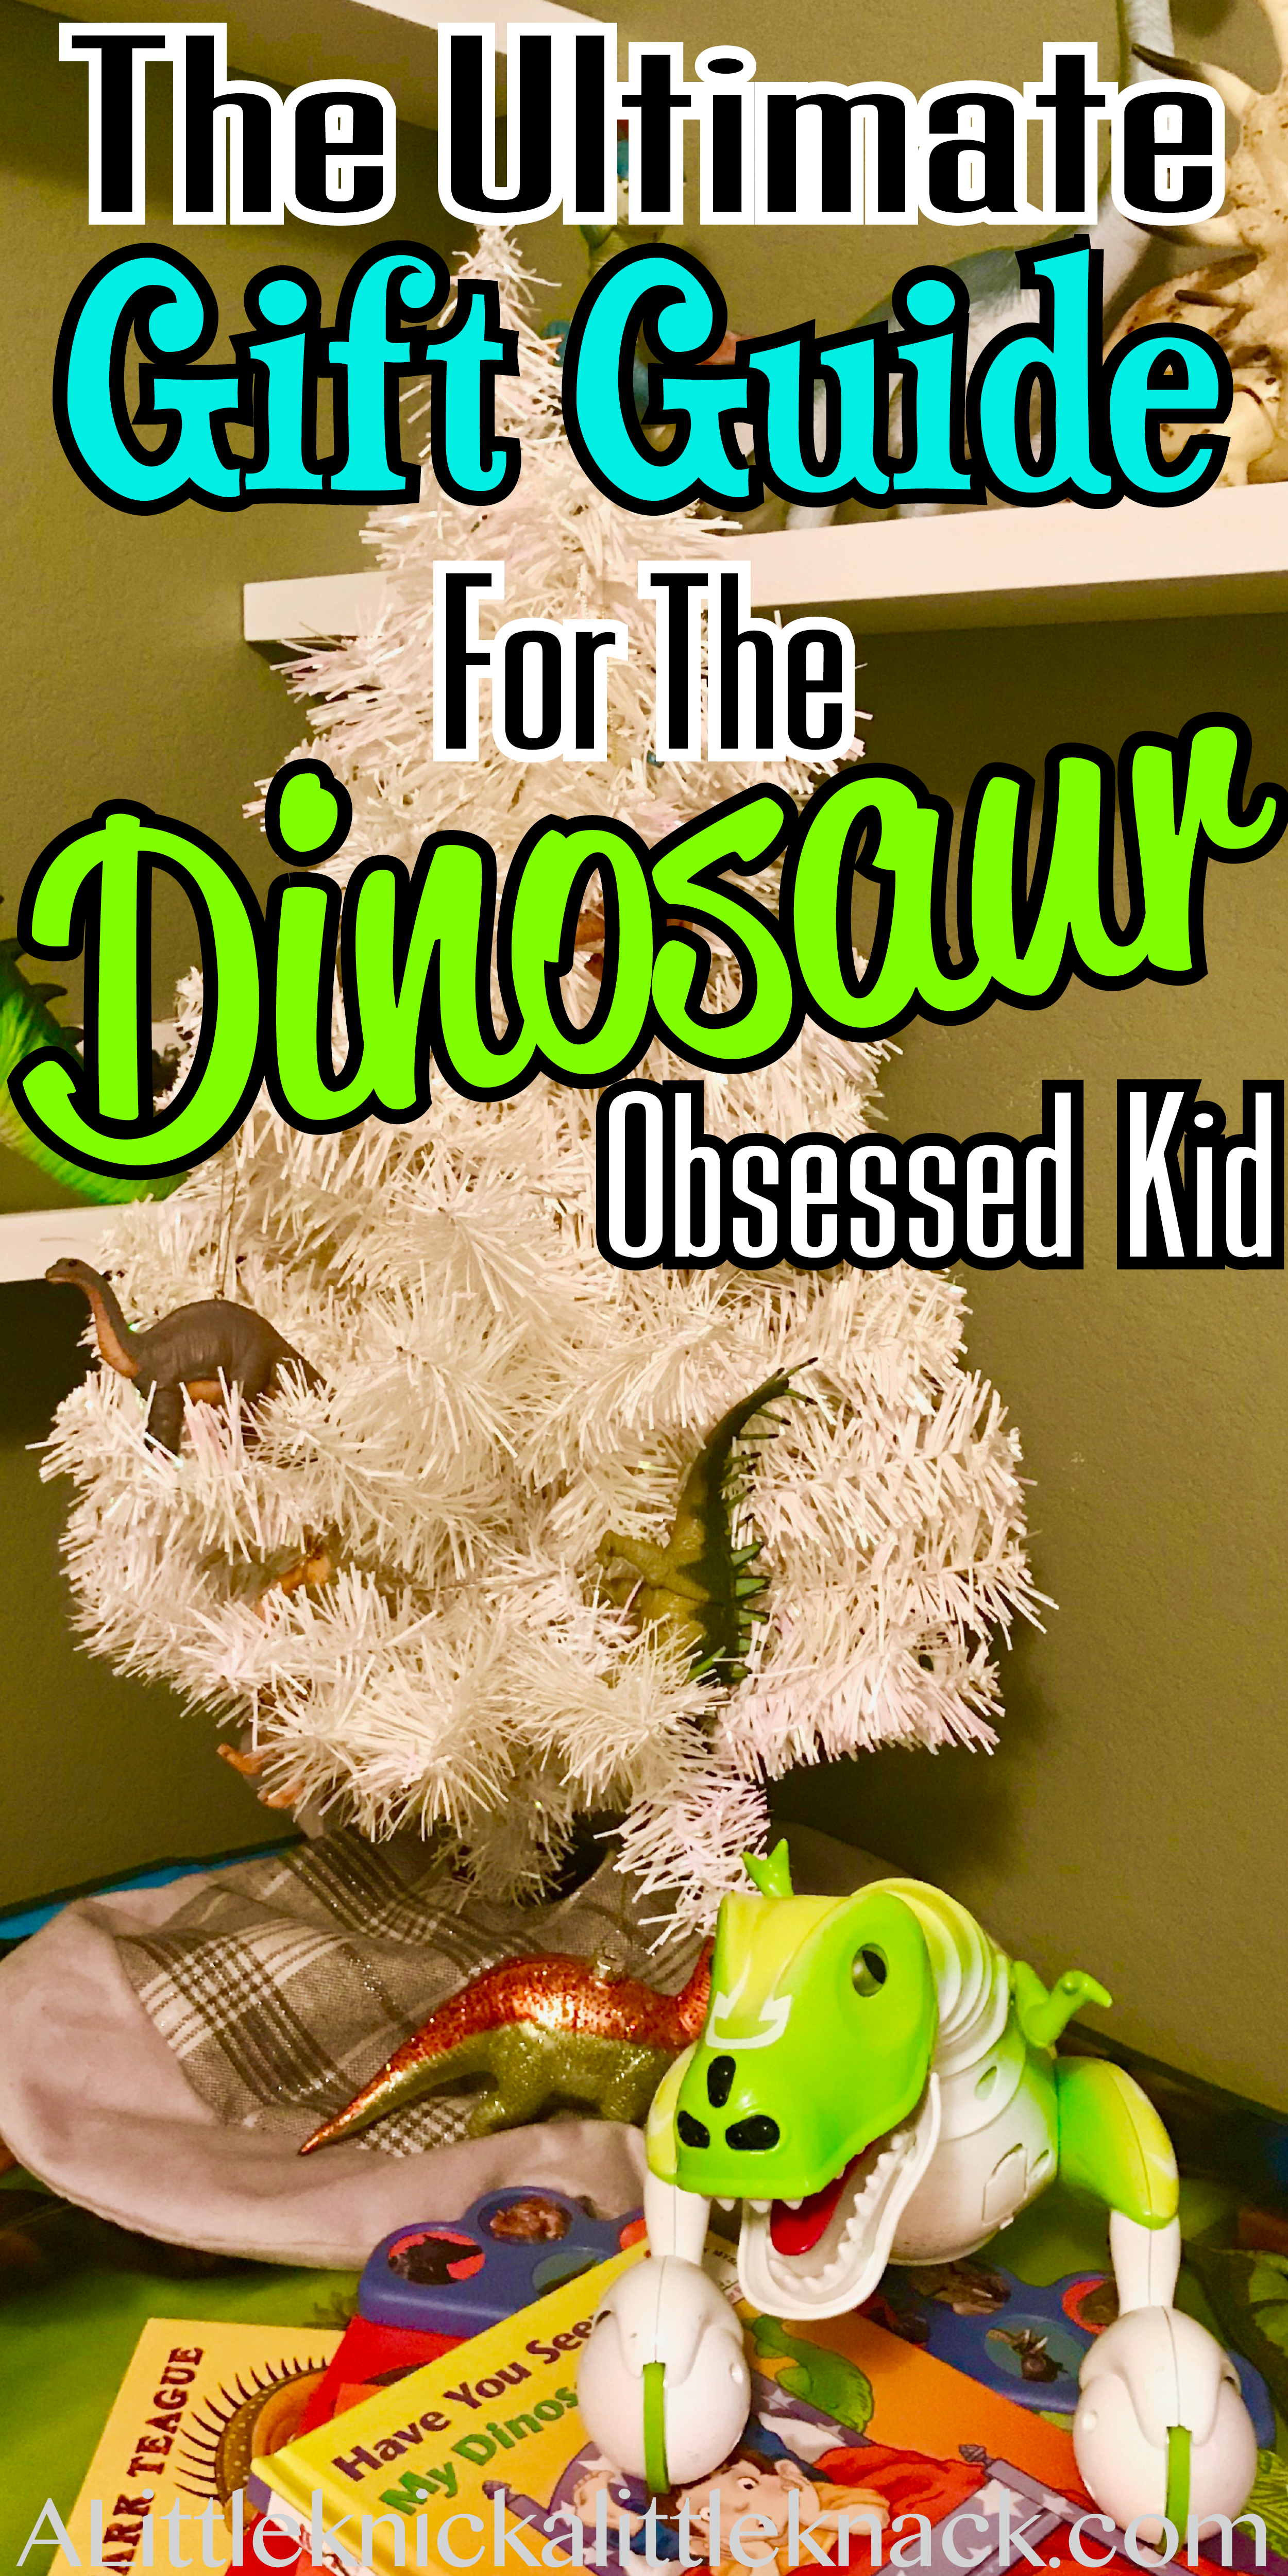 From educational dinosaur movies to jurassic toys they won’t stop playing with, this guide has it all! #gifts